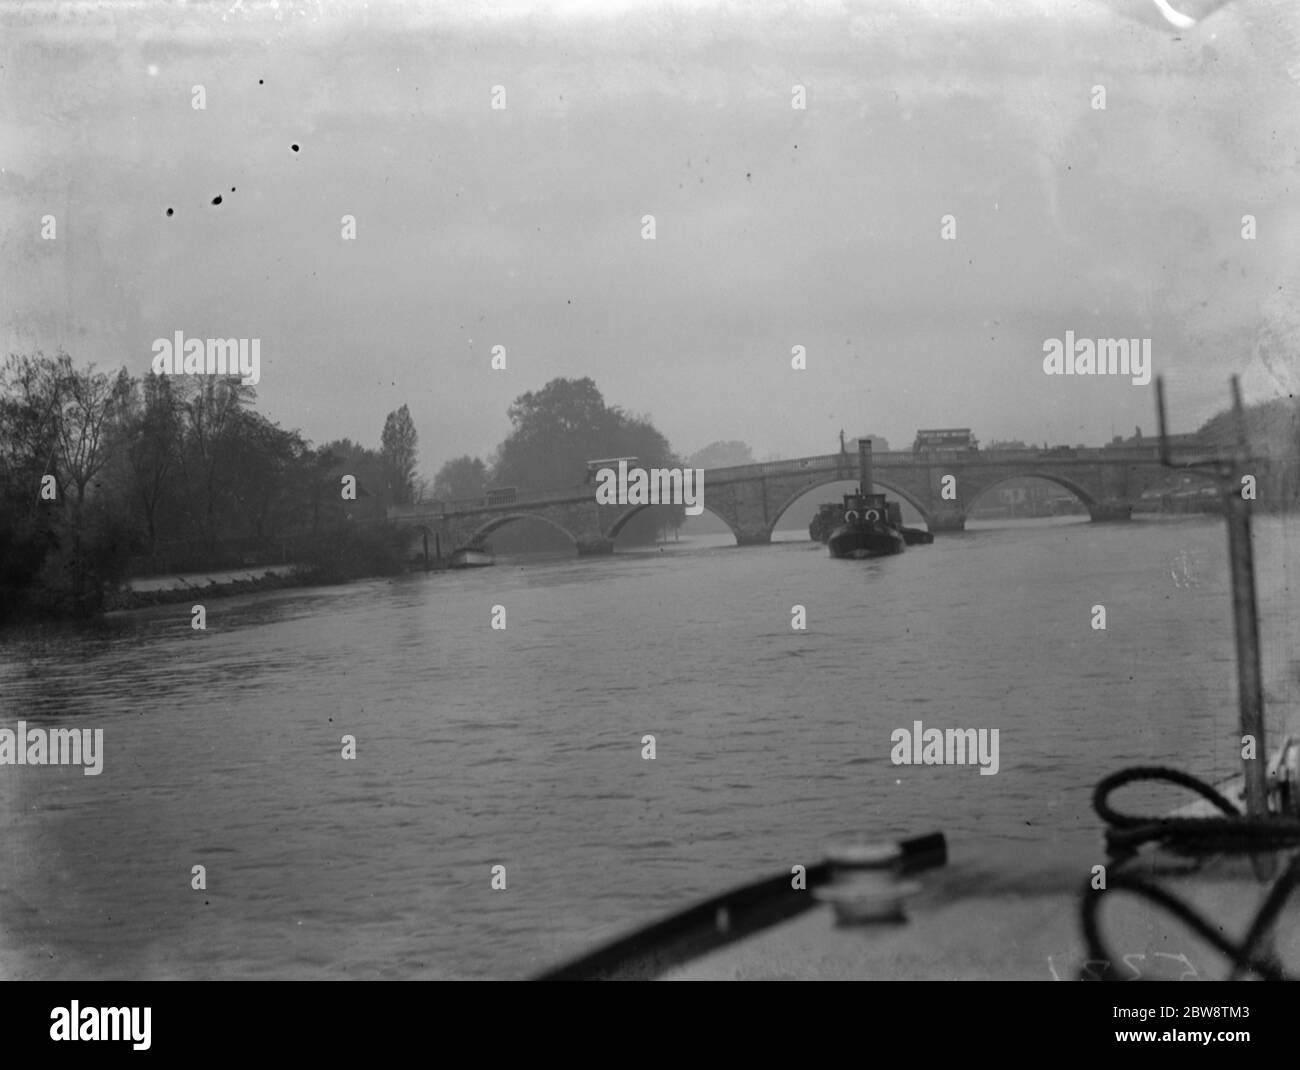 Association of Master Lightermen and Barge Owners have placed an applications for the repair of Richmond Bridge on the river Thames in London . Photos shows a tug towing a barge under the Richmond Bridge . 1936 26 October 1936 Stock Photo